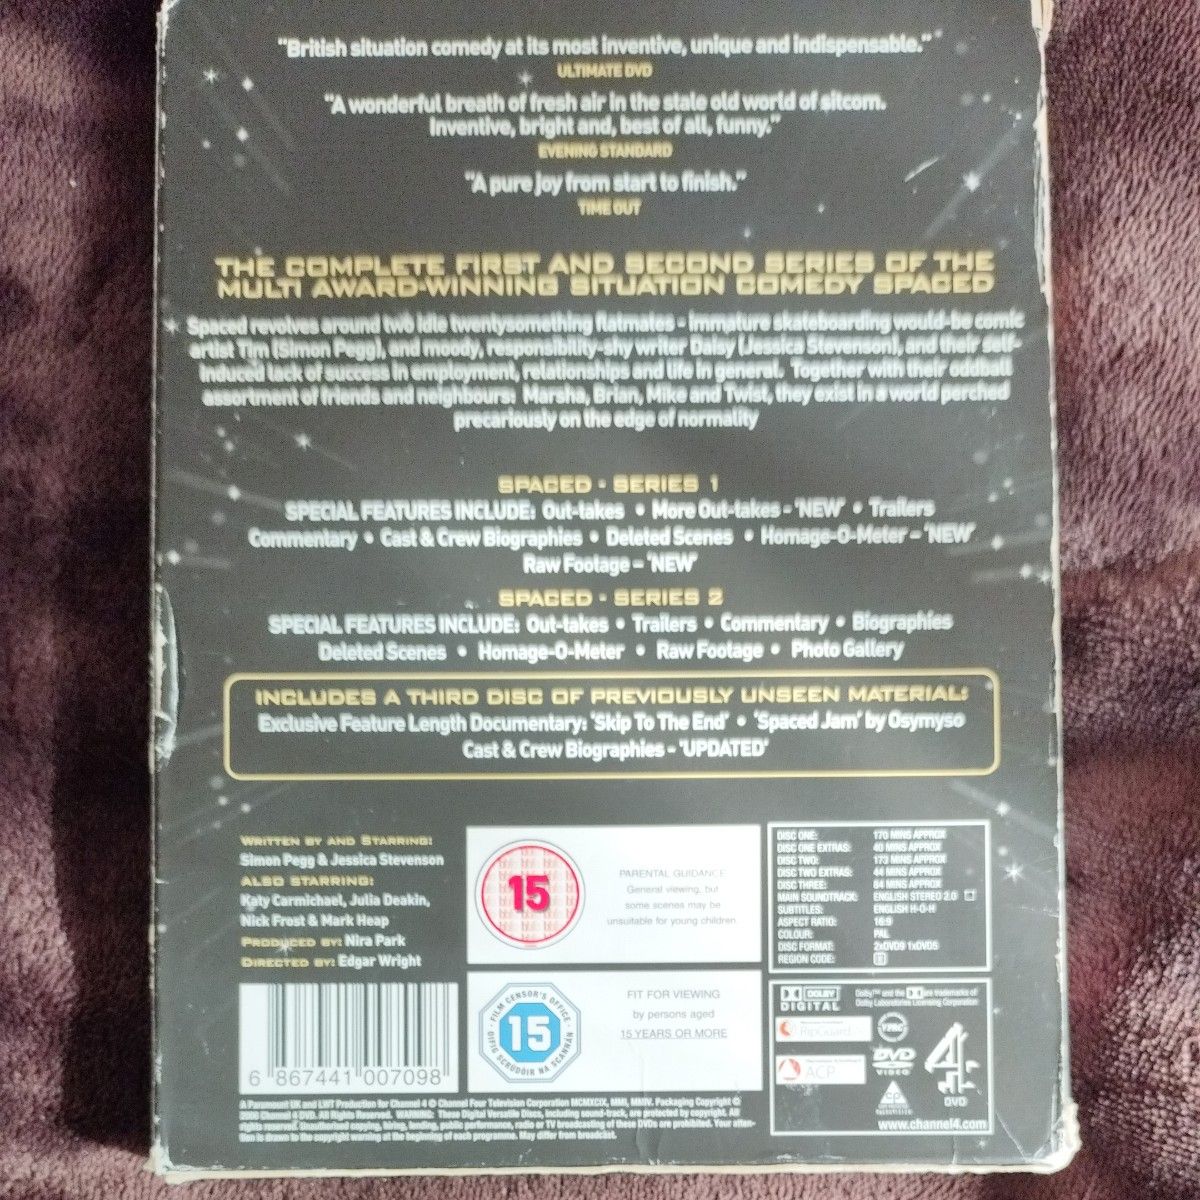 SPACED DVD